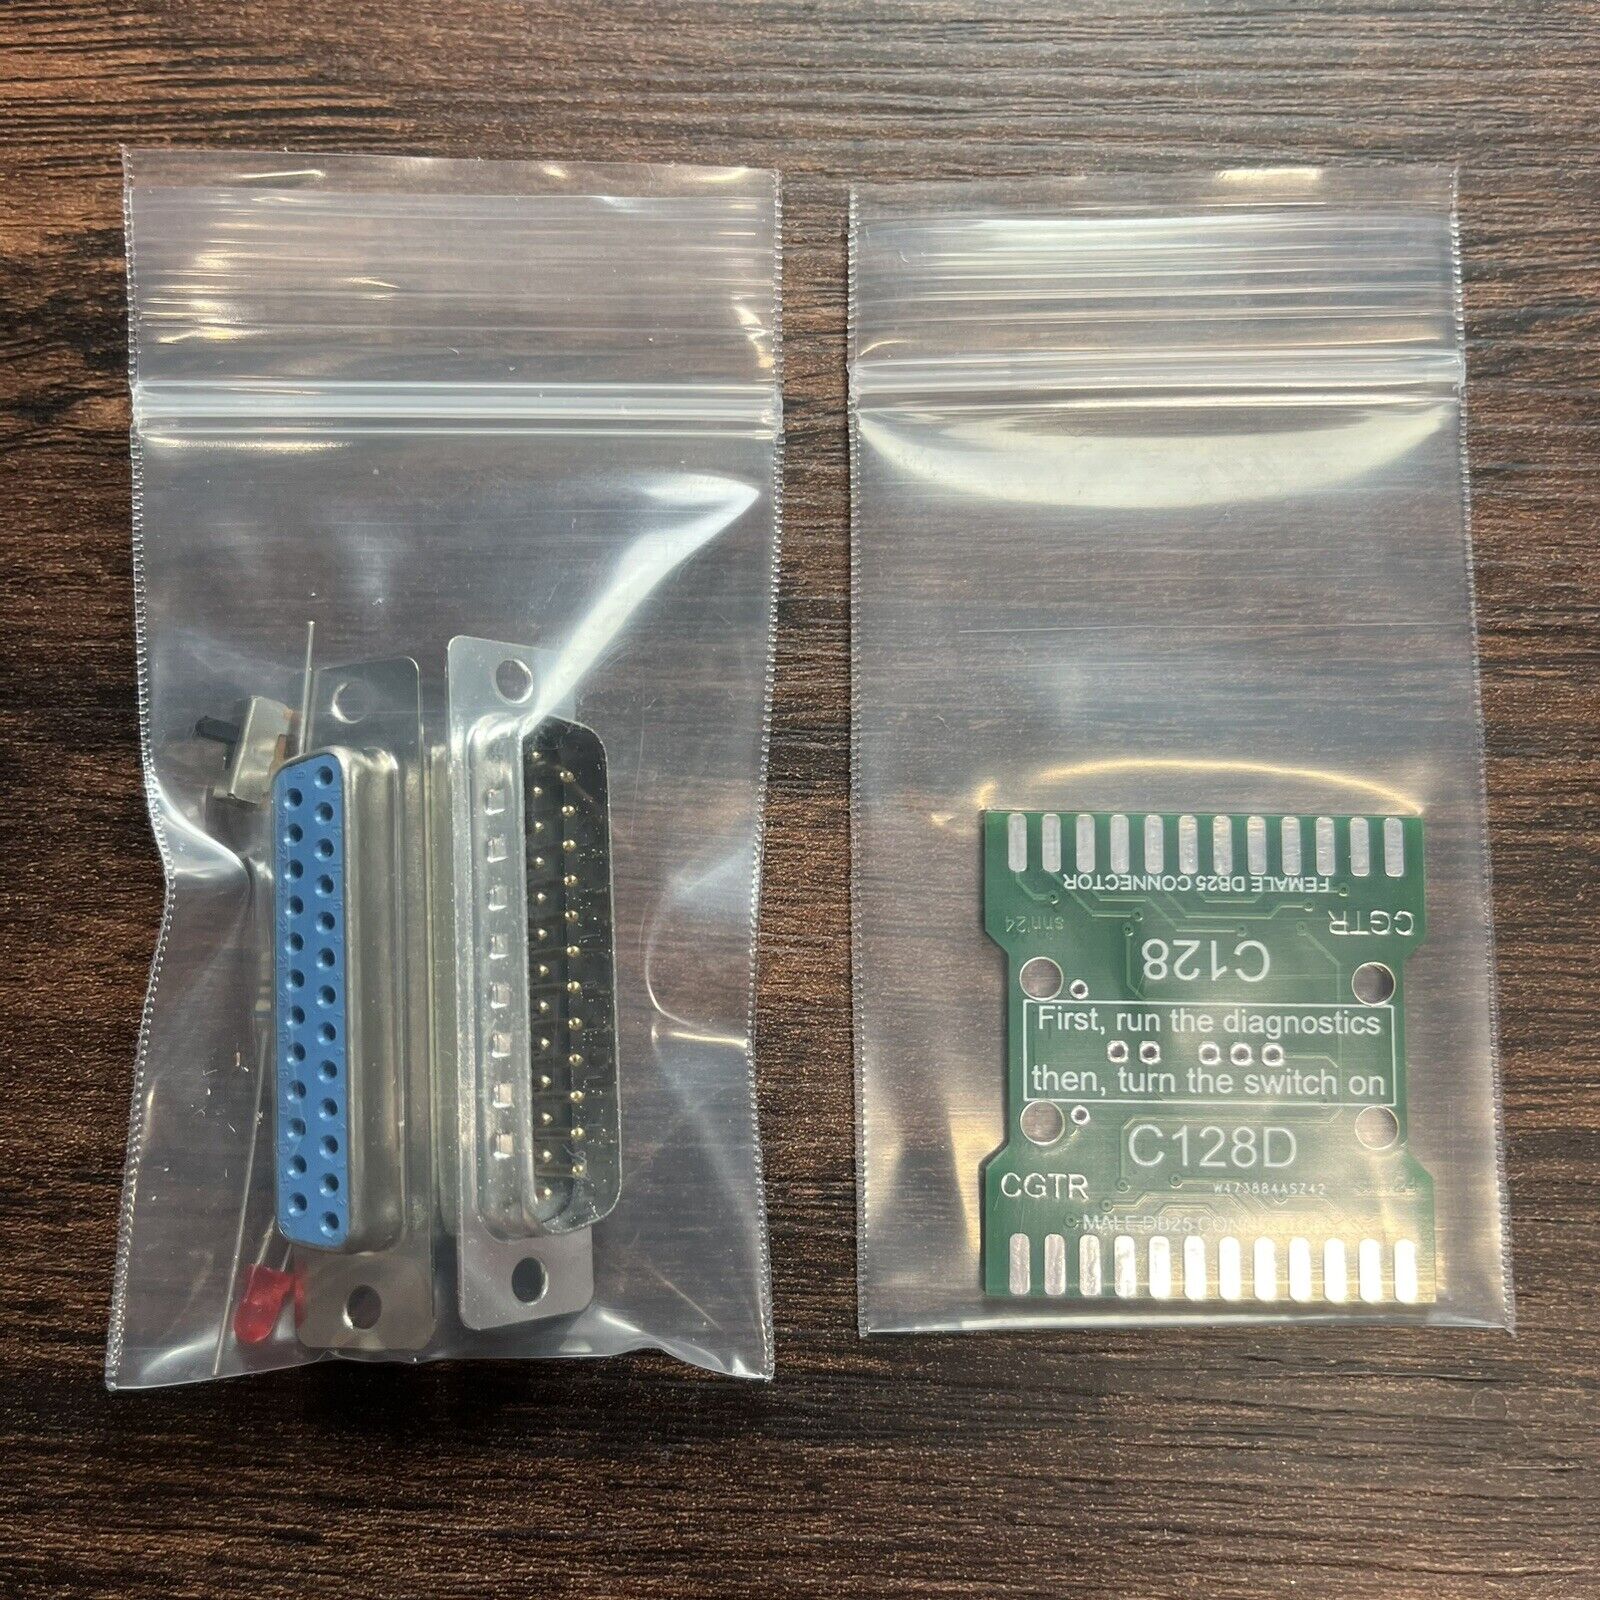 Commodore 128 Diagnostic 785260 Keyboard Dongle DIY Kit (Requires Assembly)